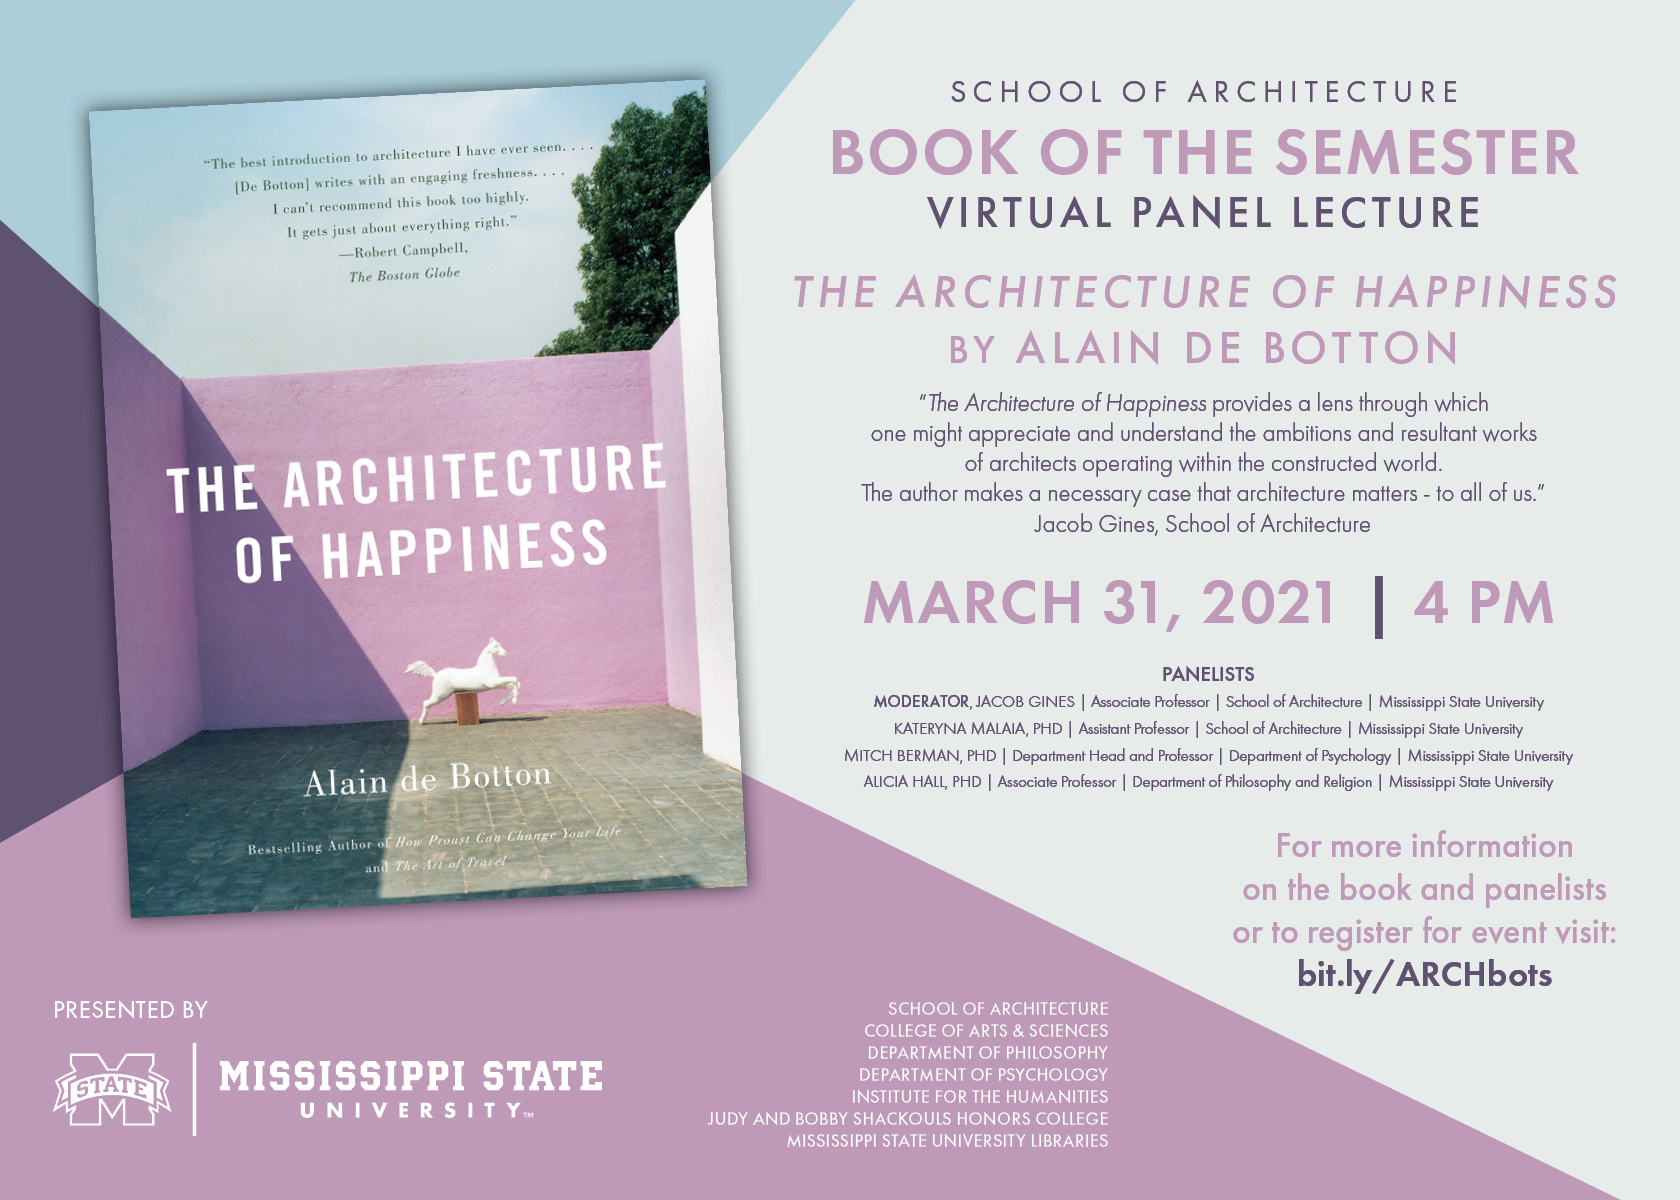 flyer for School of Architecture Book of the semester virtual panel lecture